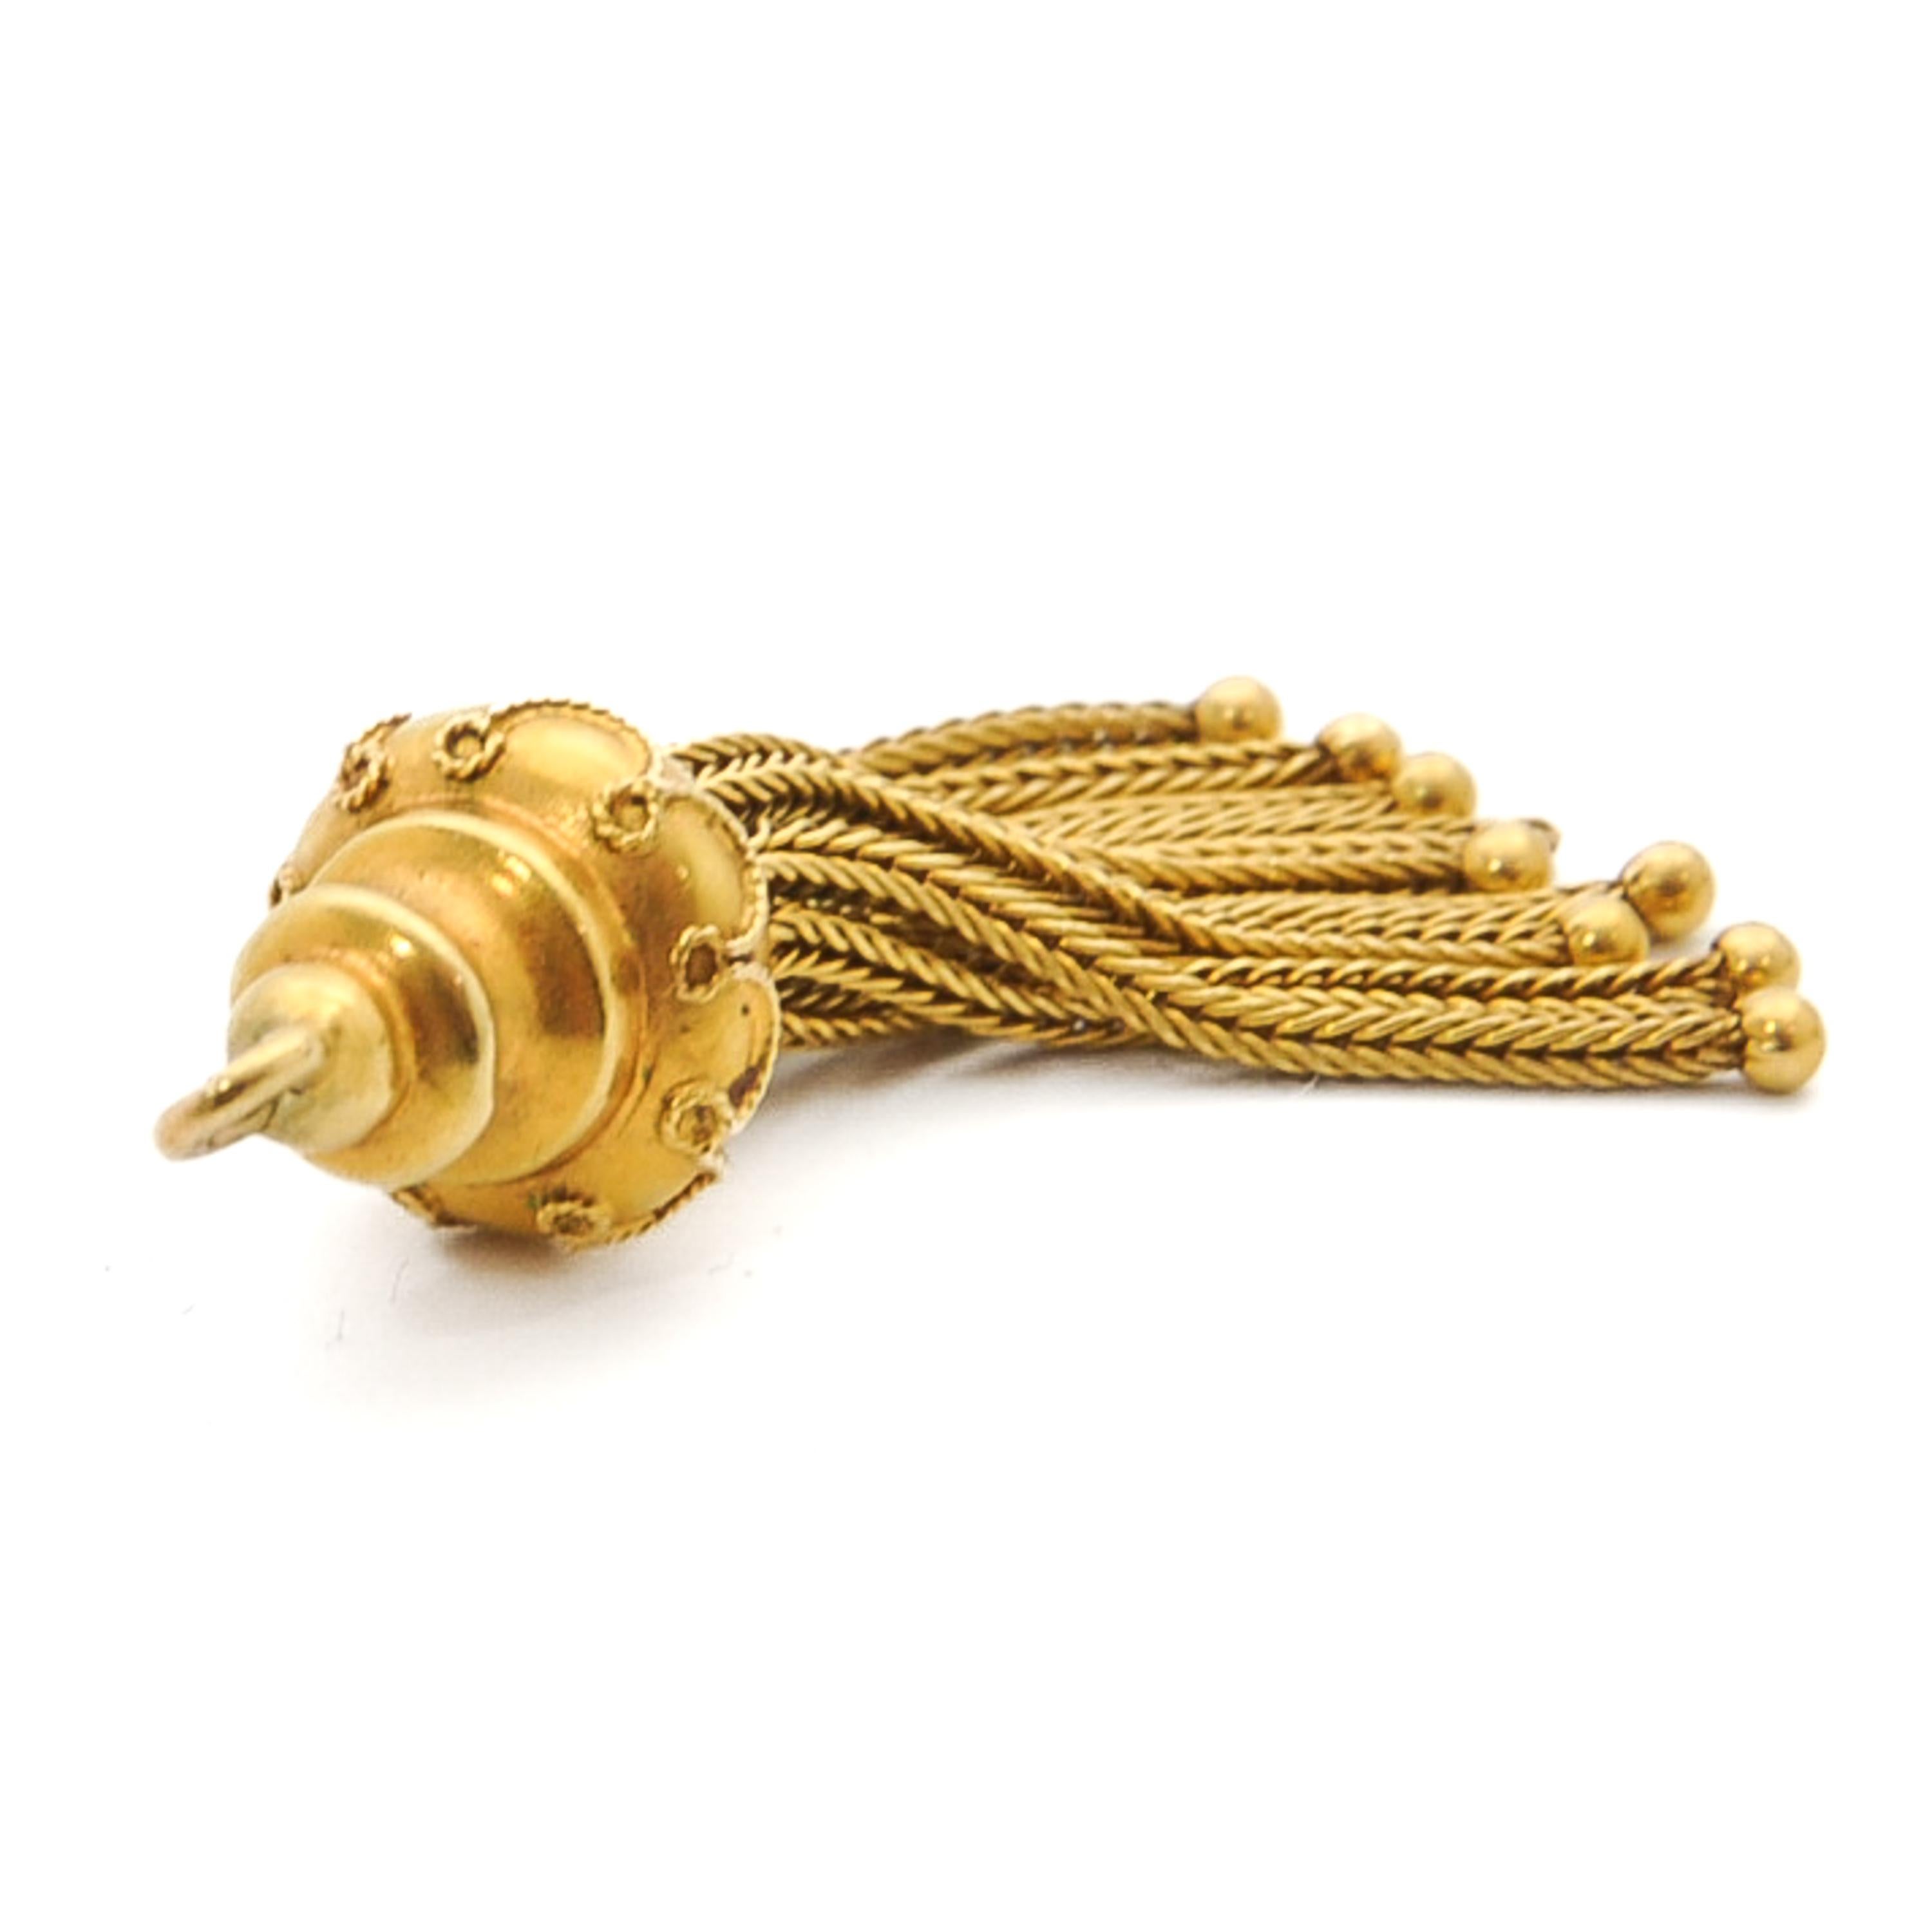 A Victorian foxtail tassel pendant crafted in 14 karat yellow gold. This pendant is beautifully detailed with a rope decor on top of the cap above the dangling tassels. The lovely tassels consist of foxtail woven chains, while the caps below keeps